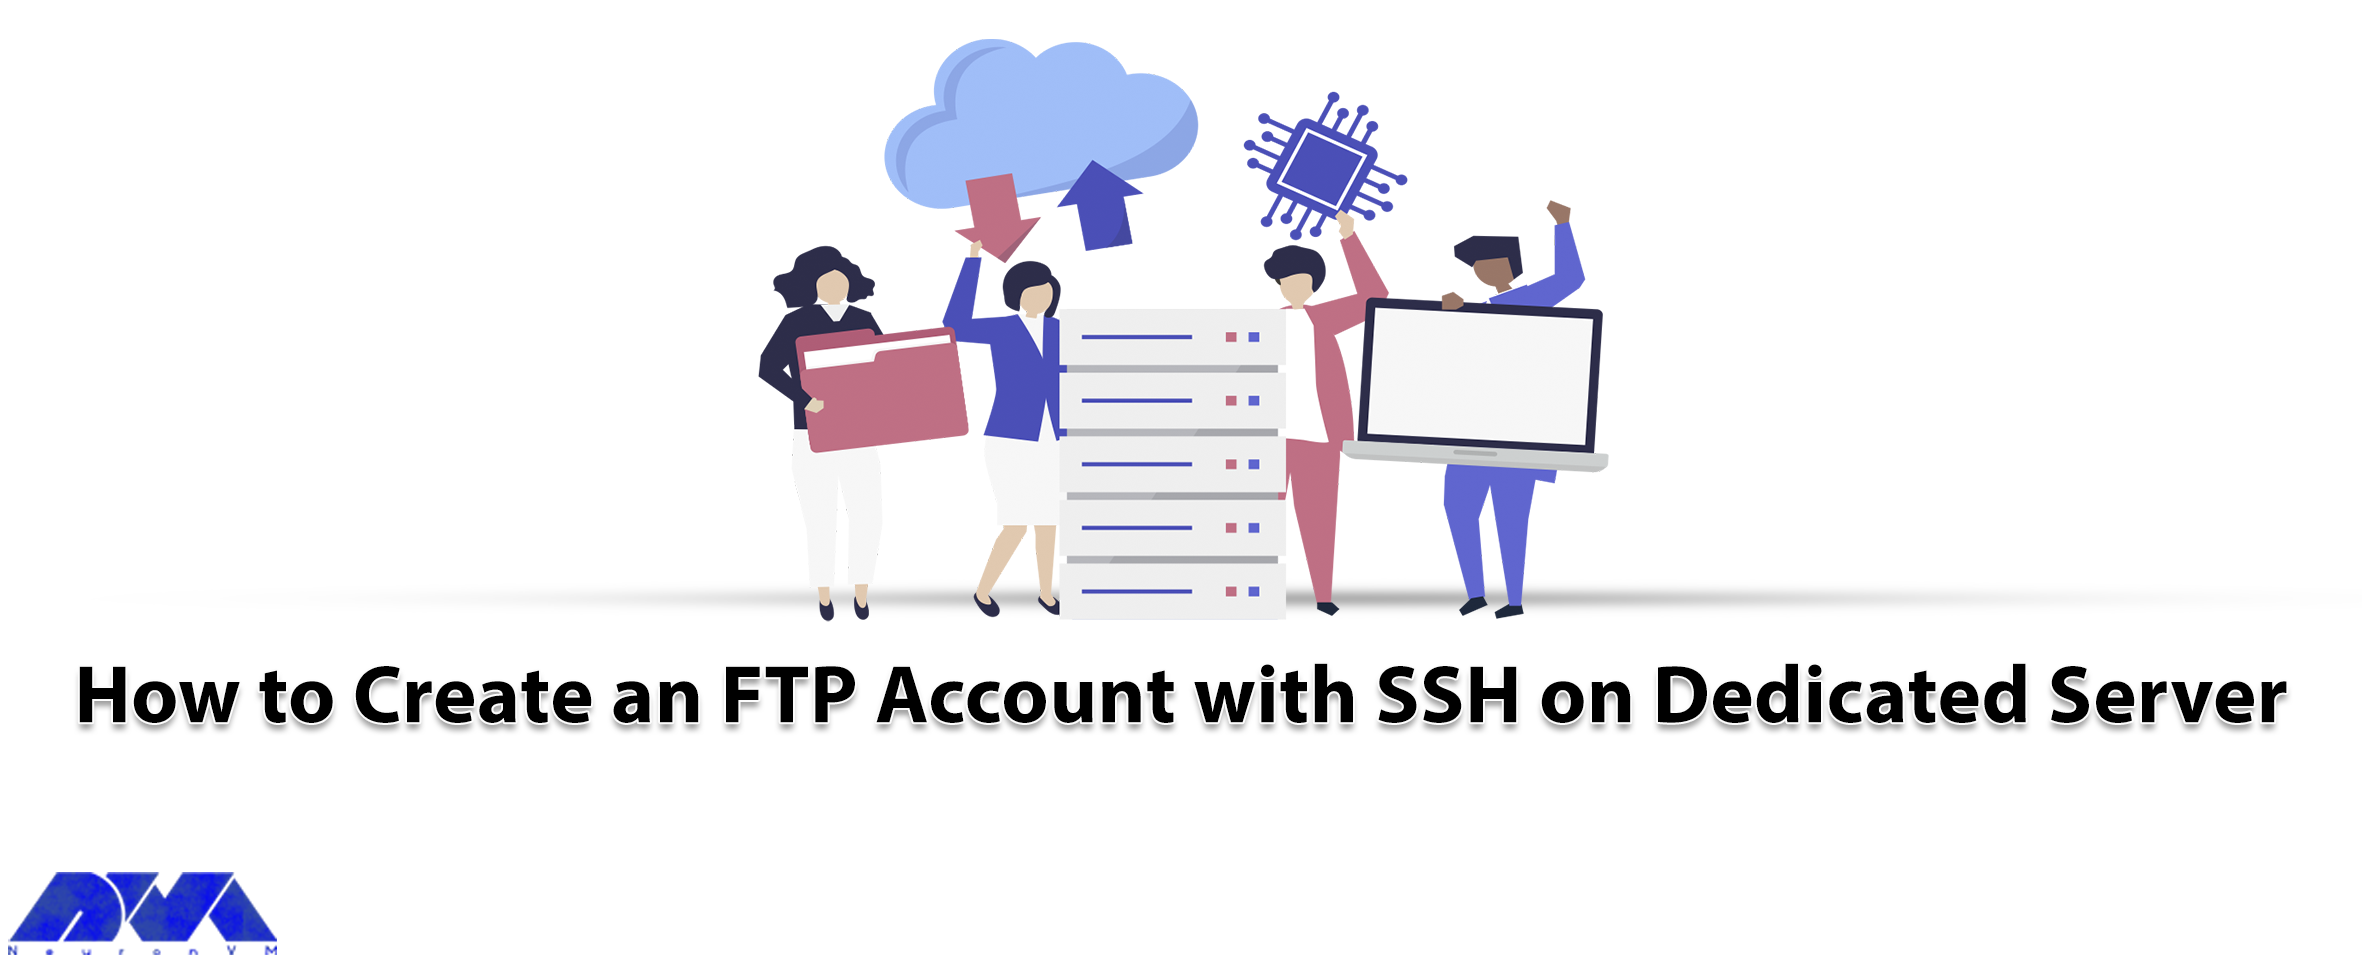 How to Create a FTP Account with SSH on Dedicated Server - NeuronVM